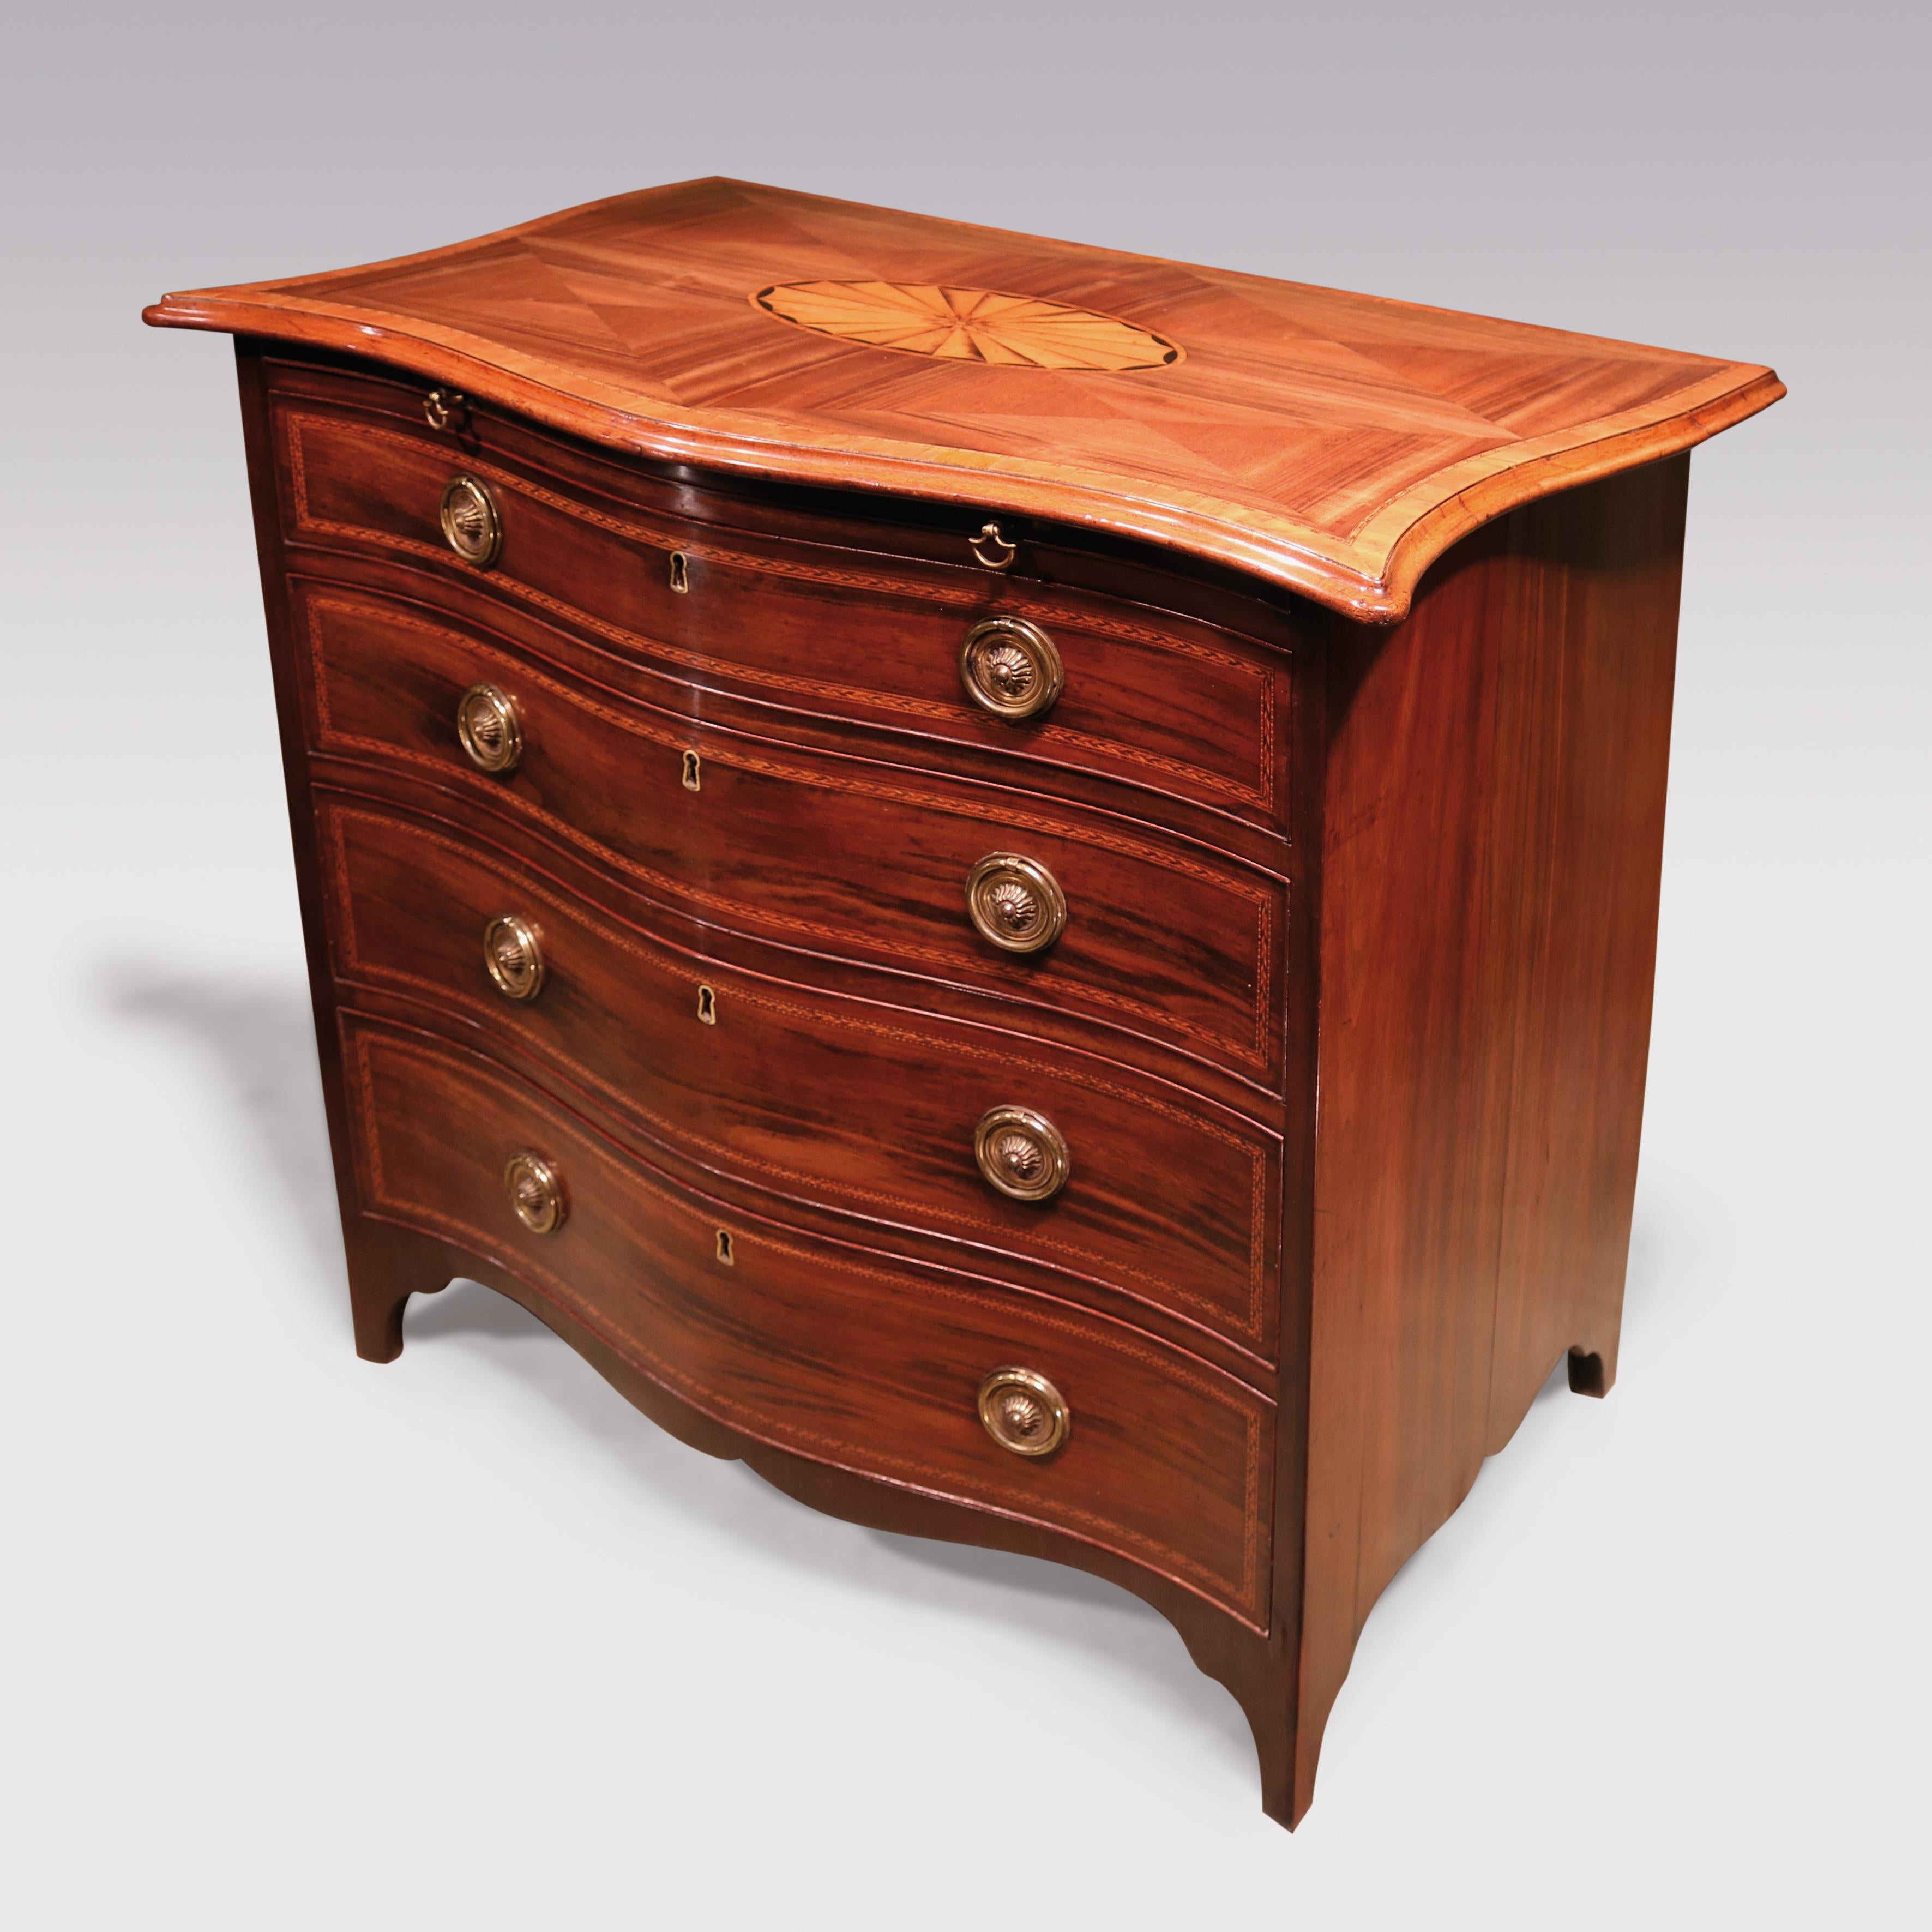 Late 18th Century Fine 18th Century Padoukwood Serpentine Chest For Sale